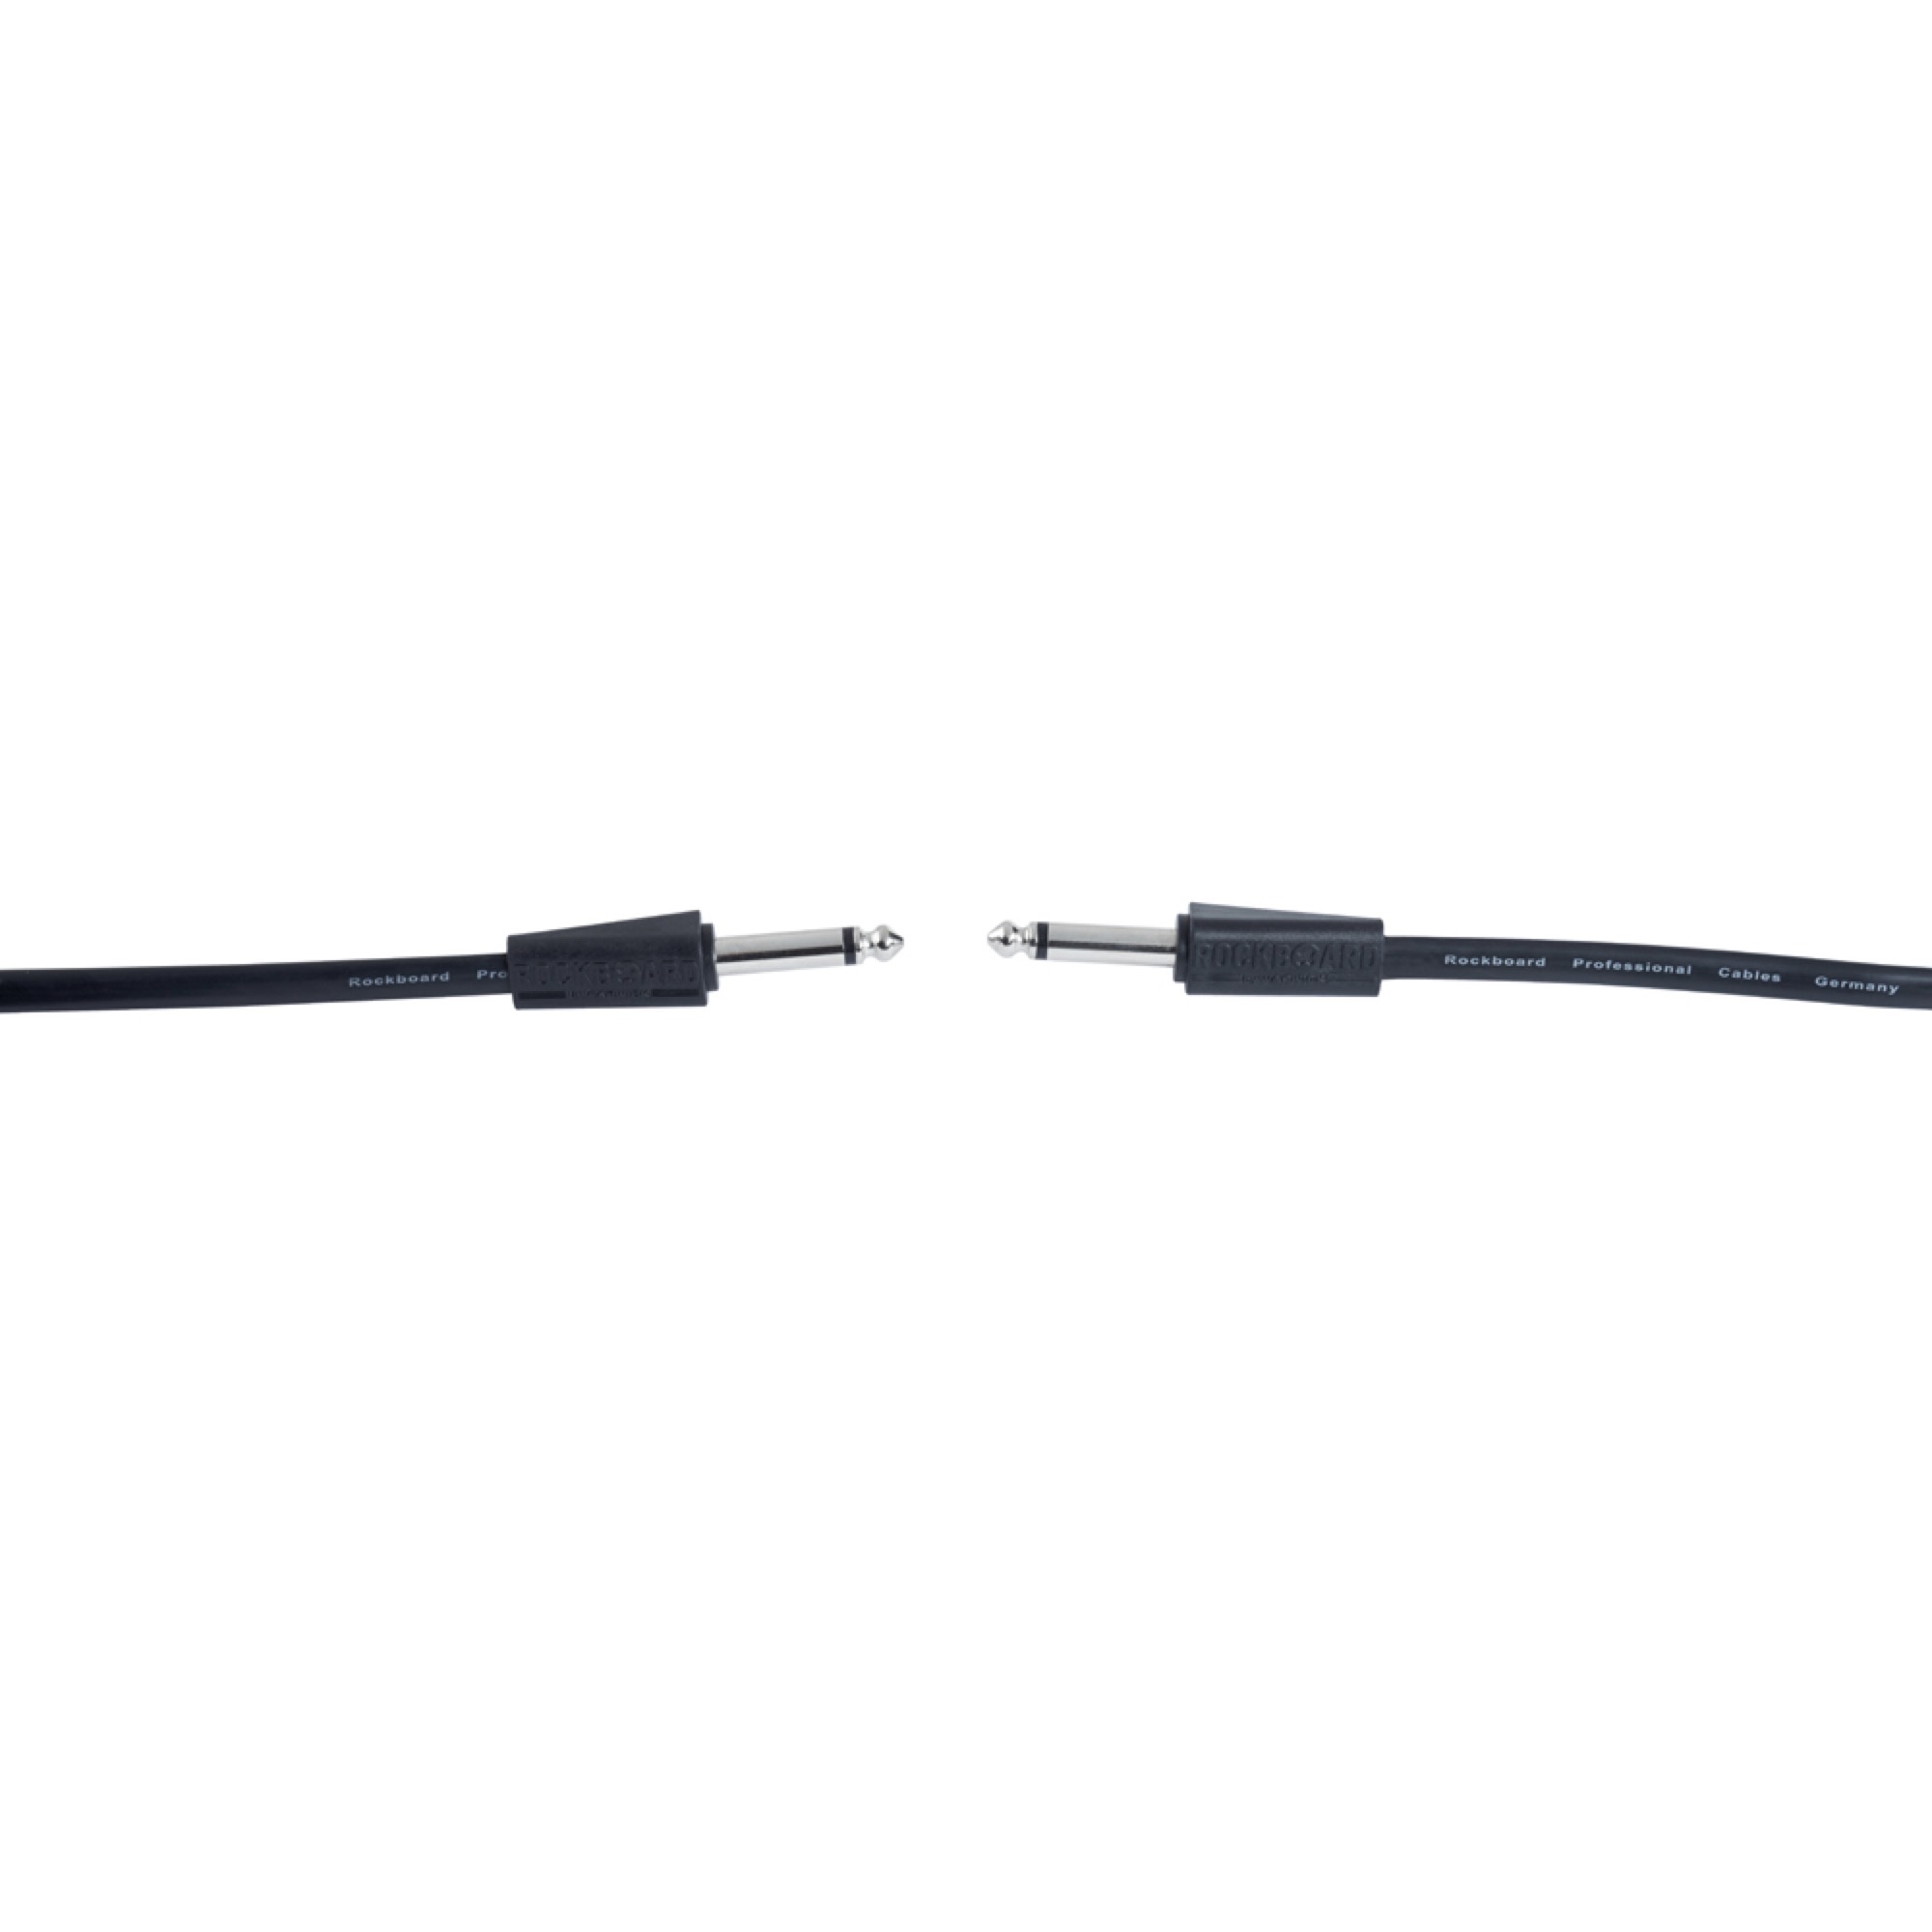 Rockboard Flat Lead (Instrument) Cable - 300 cm / 118.11" (~10 ft) - 1/4" Straight to Straight